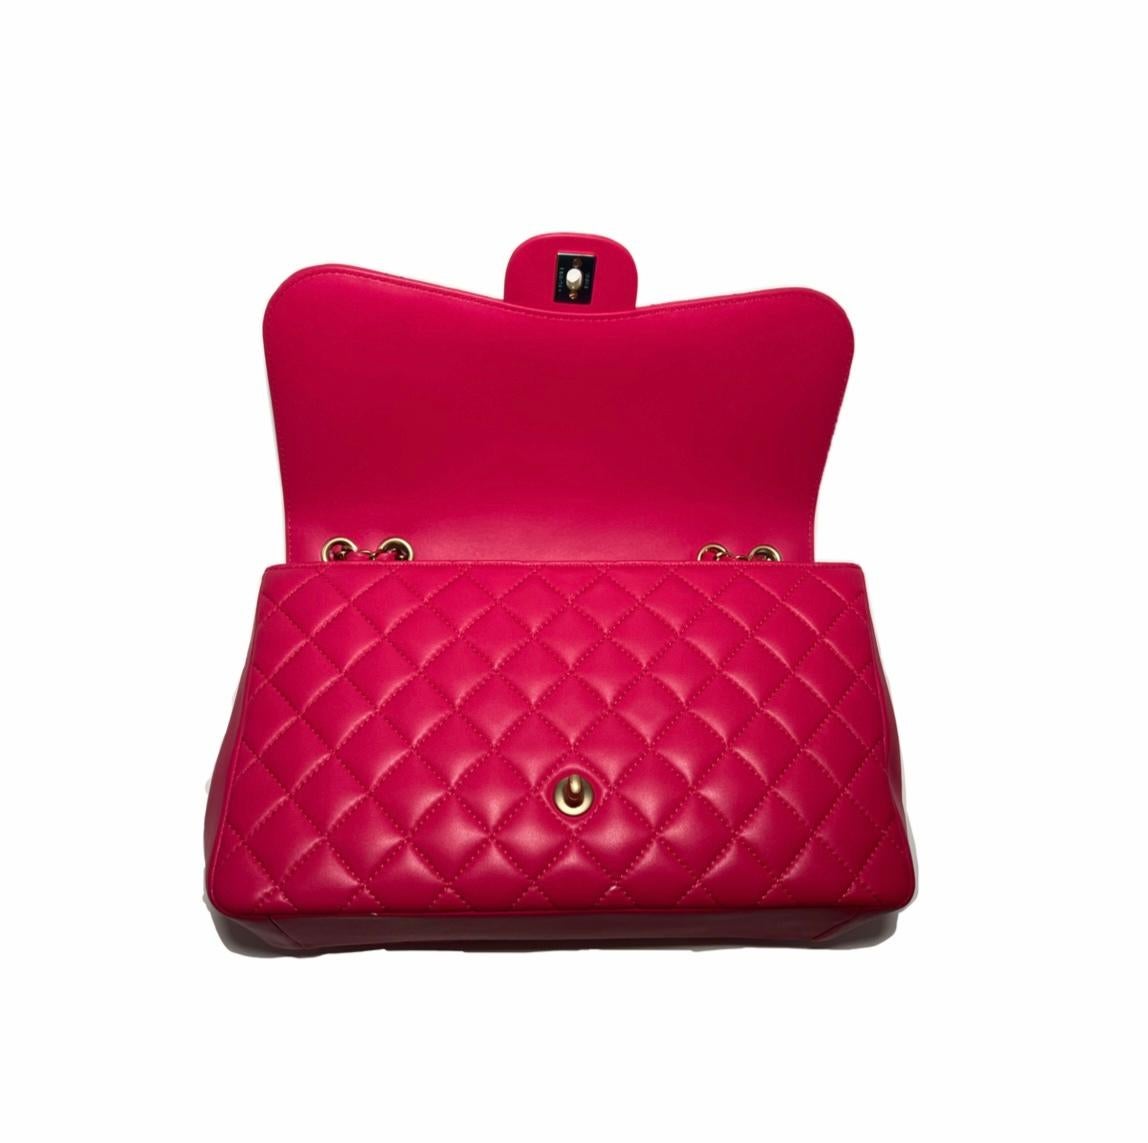 This is an authentic CHANEL Lambskin Quilted Medium Double Flap in Dark Pink. This stunning medium sized shoulder bag is crafted of diamond quilted lambskin leather in Dark Pink. It features threaded leather polished gold chain link shoulder straps